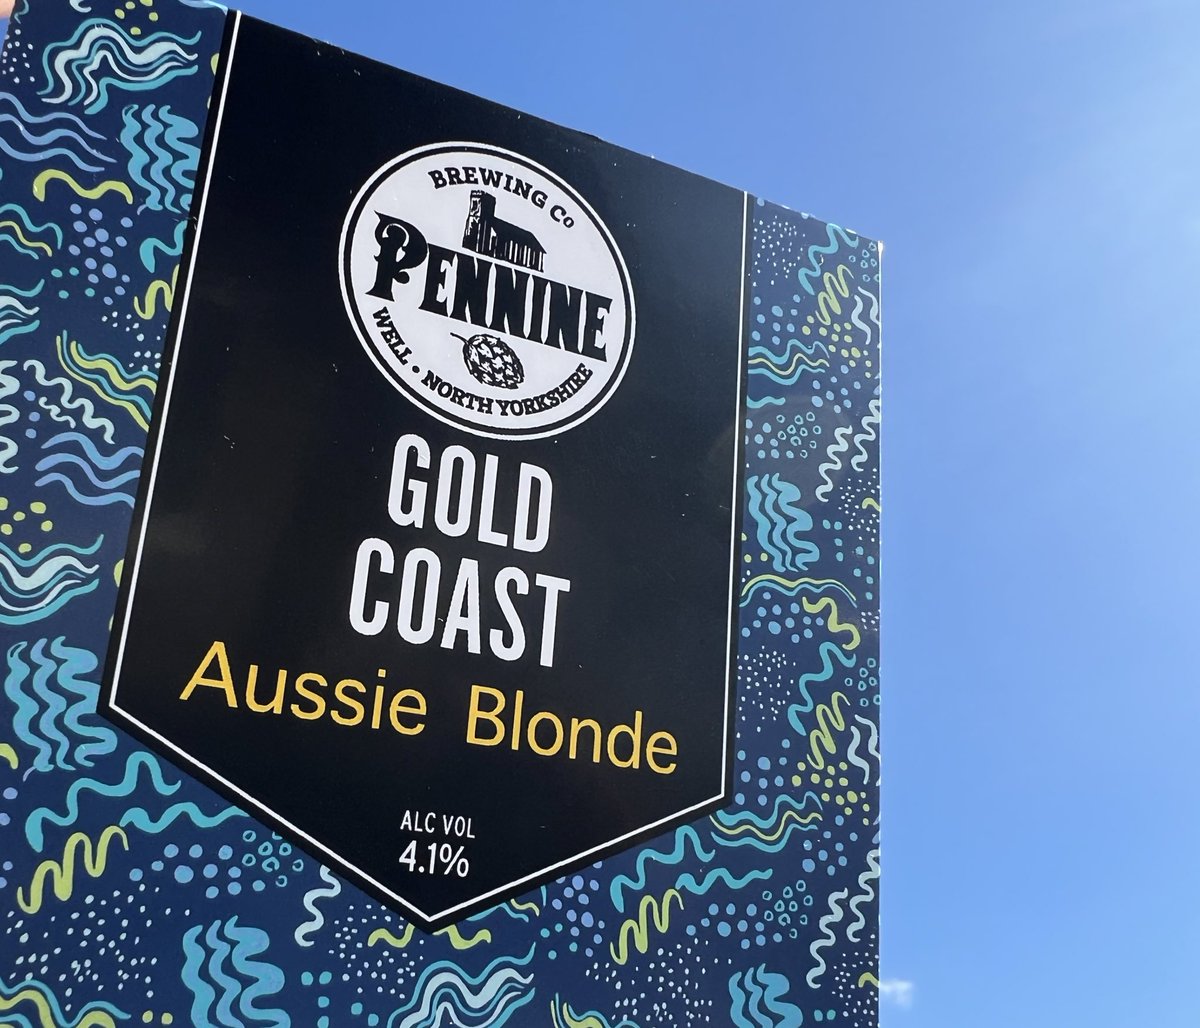 Oh g’day! 👋🏼 Is that a Blonde beauty we can spy?!GOLD COAST sold out before we had even shouted about it! 🙌🏼 A nod to the Australian @F1 Grand Prix happening on Sunday 🇦🇺 🏎️ Peach & orange aromas from the sought after Australian Galaxy Hop #australianformulaone #penninebrewingco